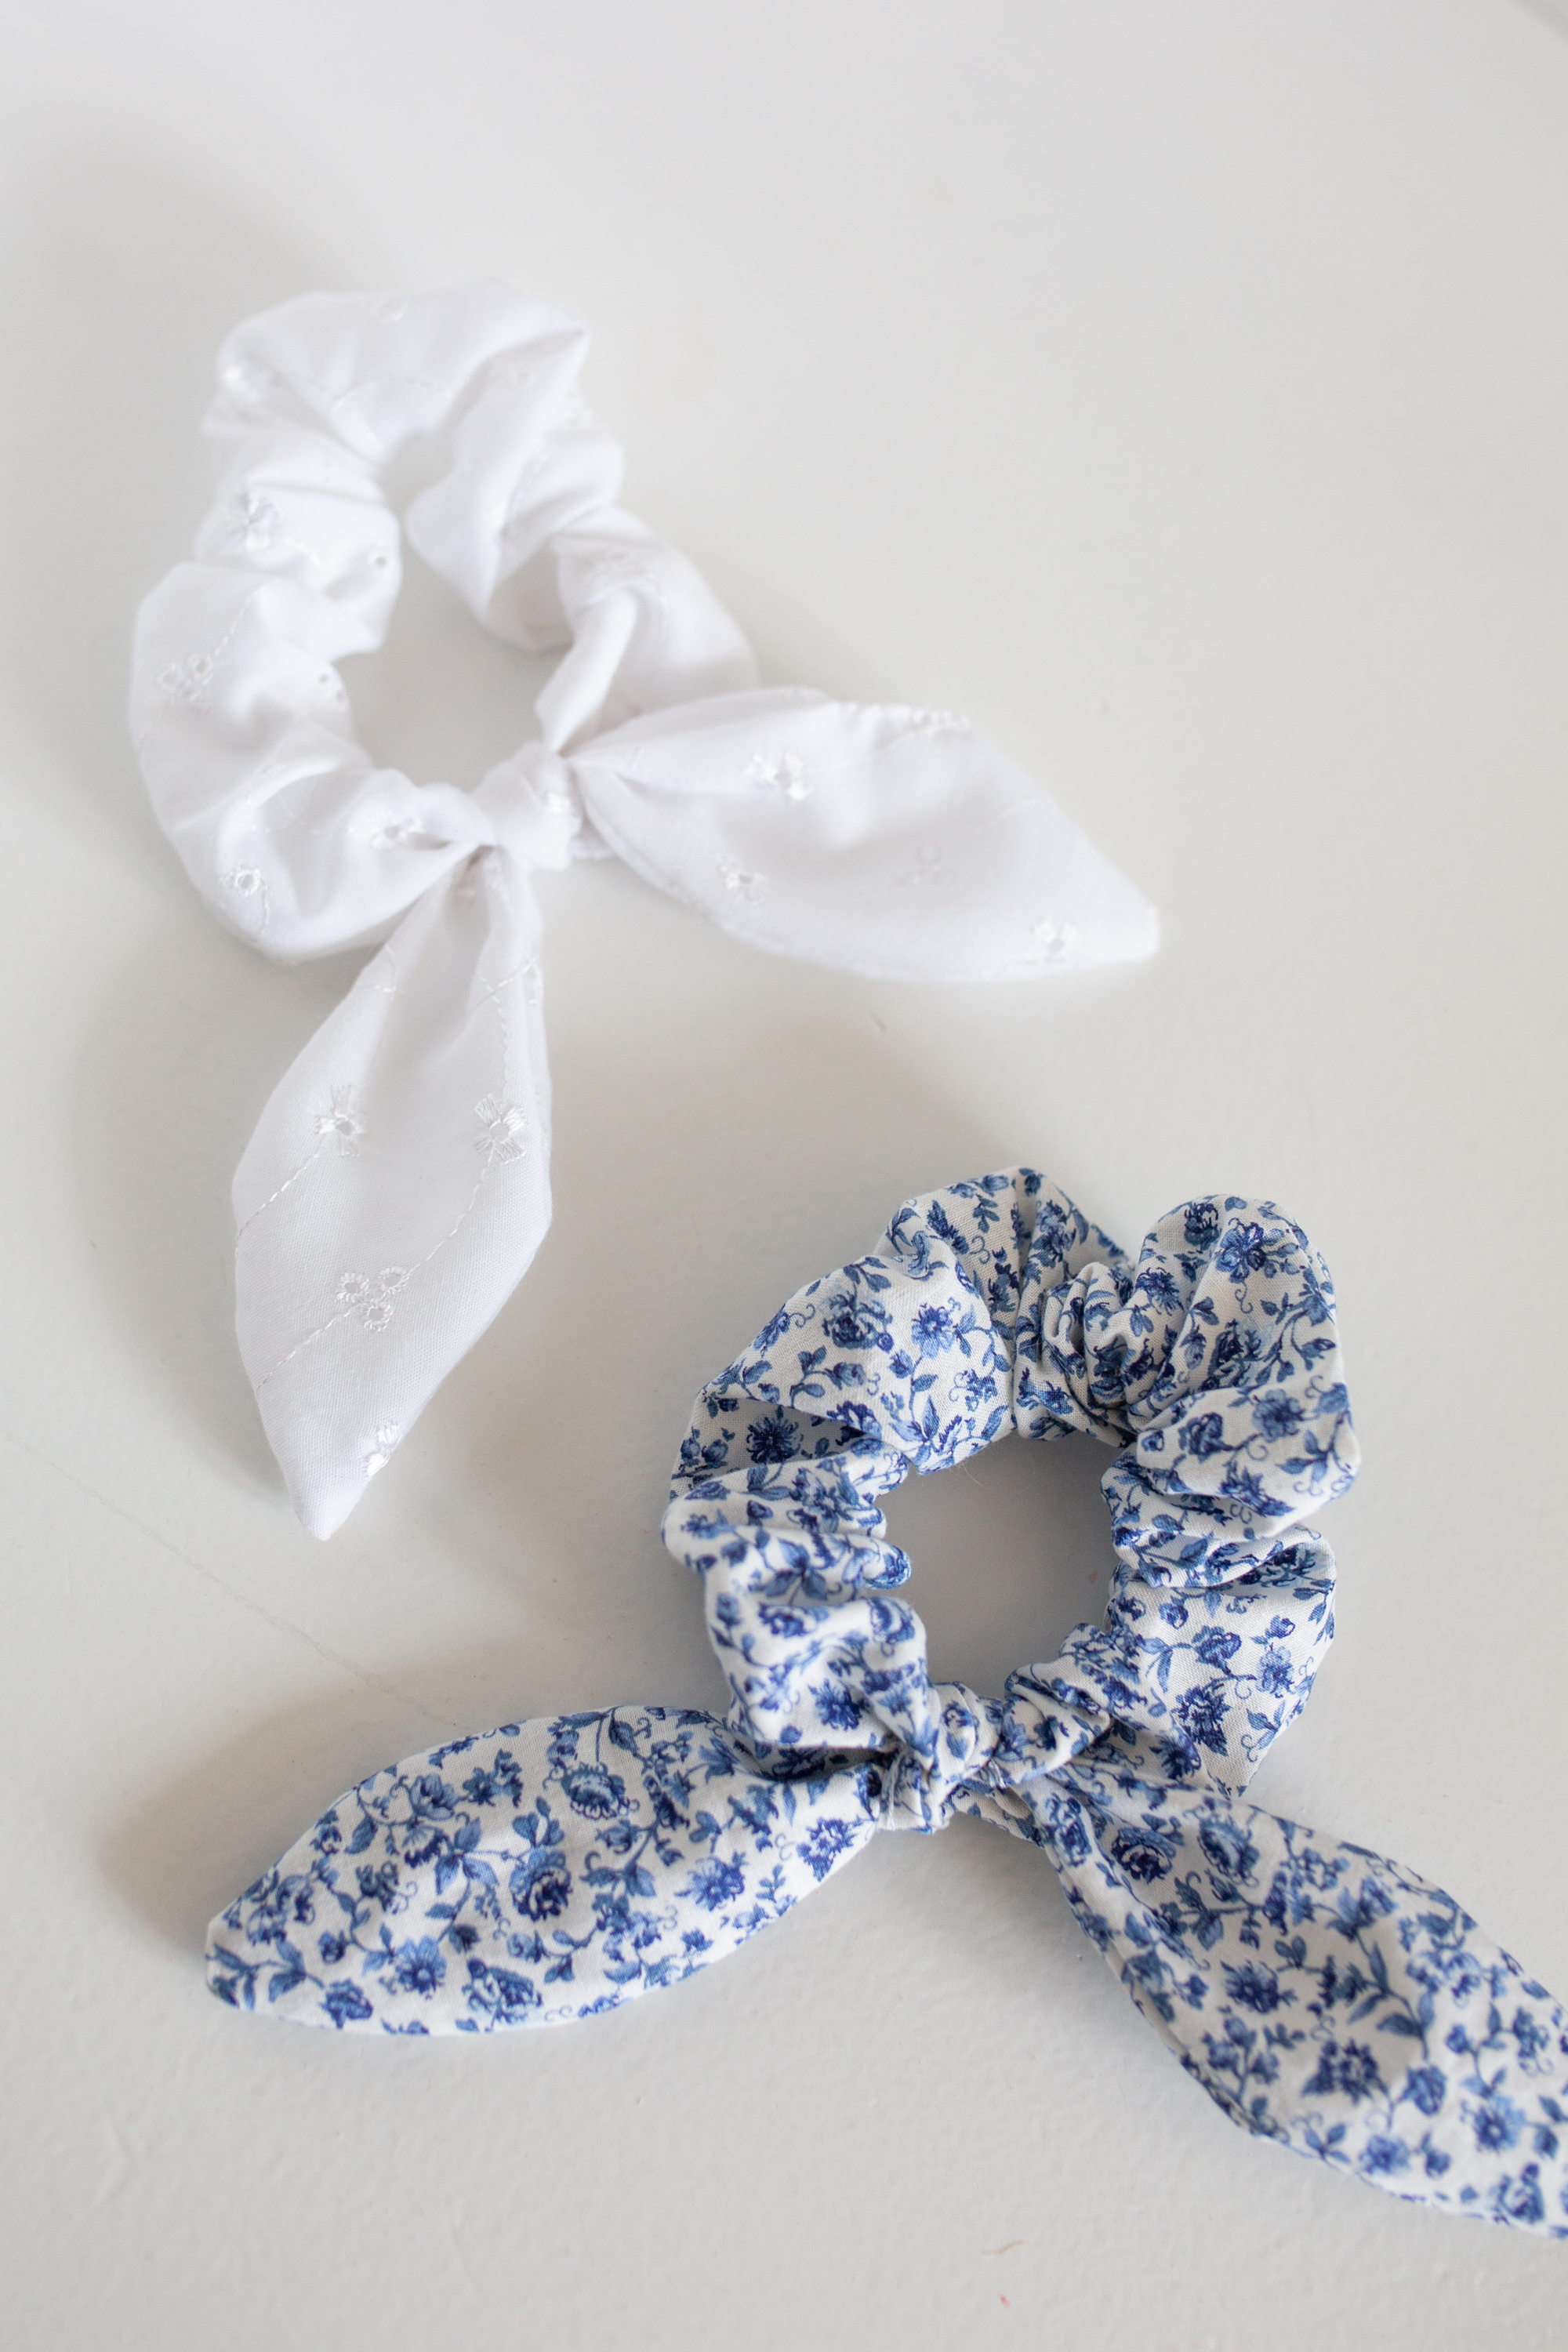 Blue and White Floral Scrunchie / White Eyele Hair Tie / Bow Hair Scrunchie / Hair Accessory / Straw Bag / White Jeans / Preppy Style - Sunshine Style 